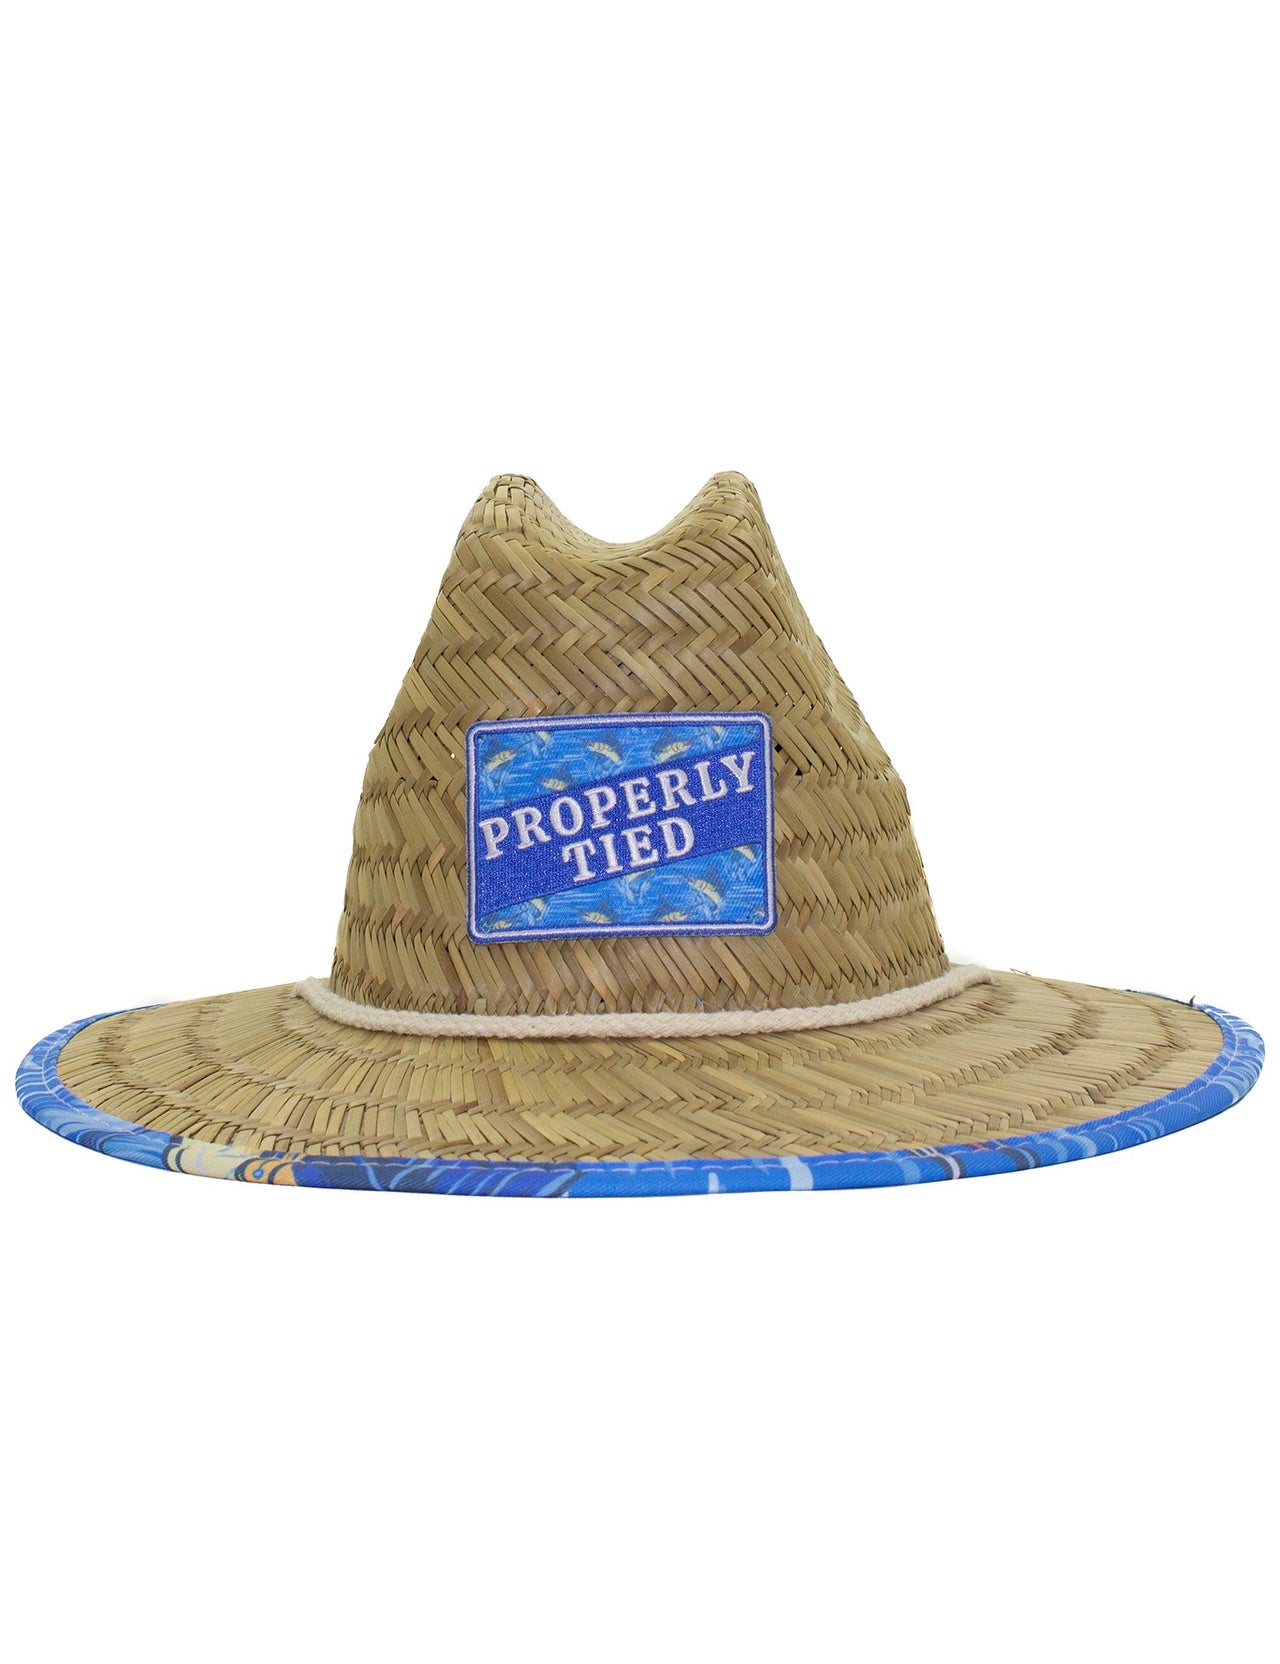 Properly Tied Boys Cabo Straw Hat LDH4003 5103